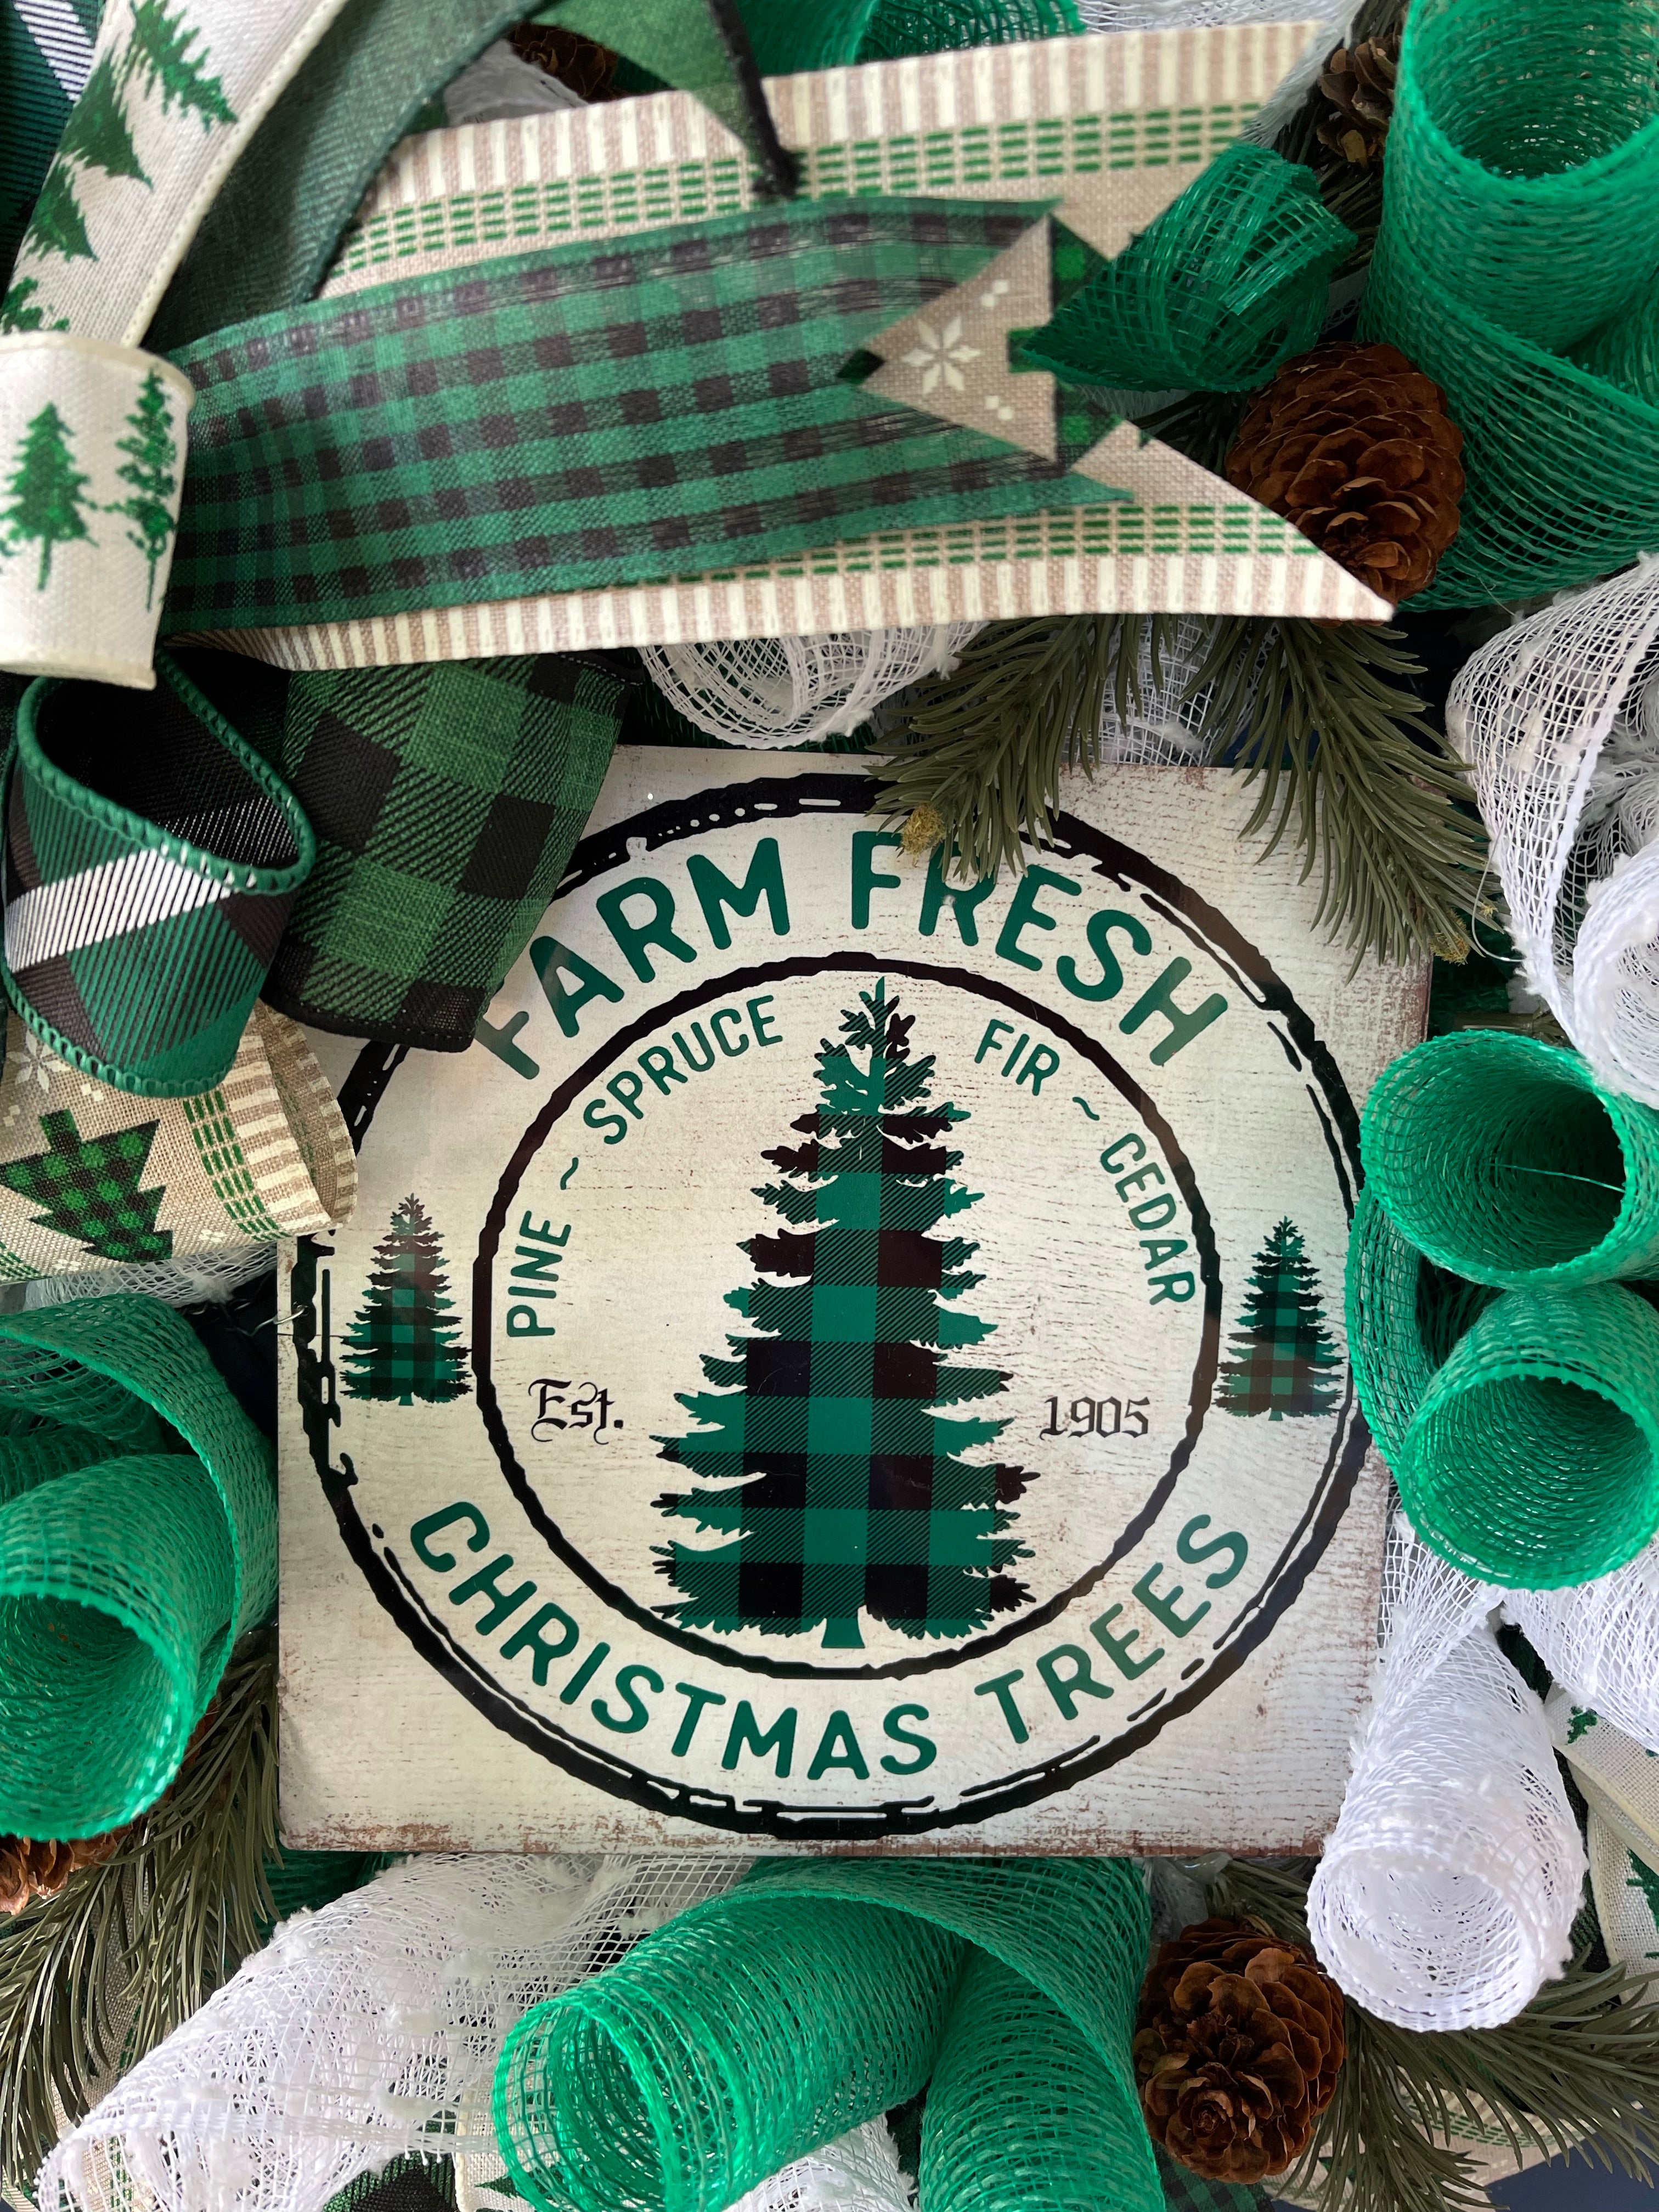 Close up of Farm Fresh Christmas Trees Sign, Featuring Pine, Spruce, Fir and Cedar Established 1905 on wreath